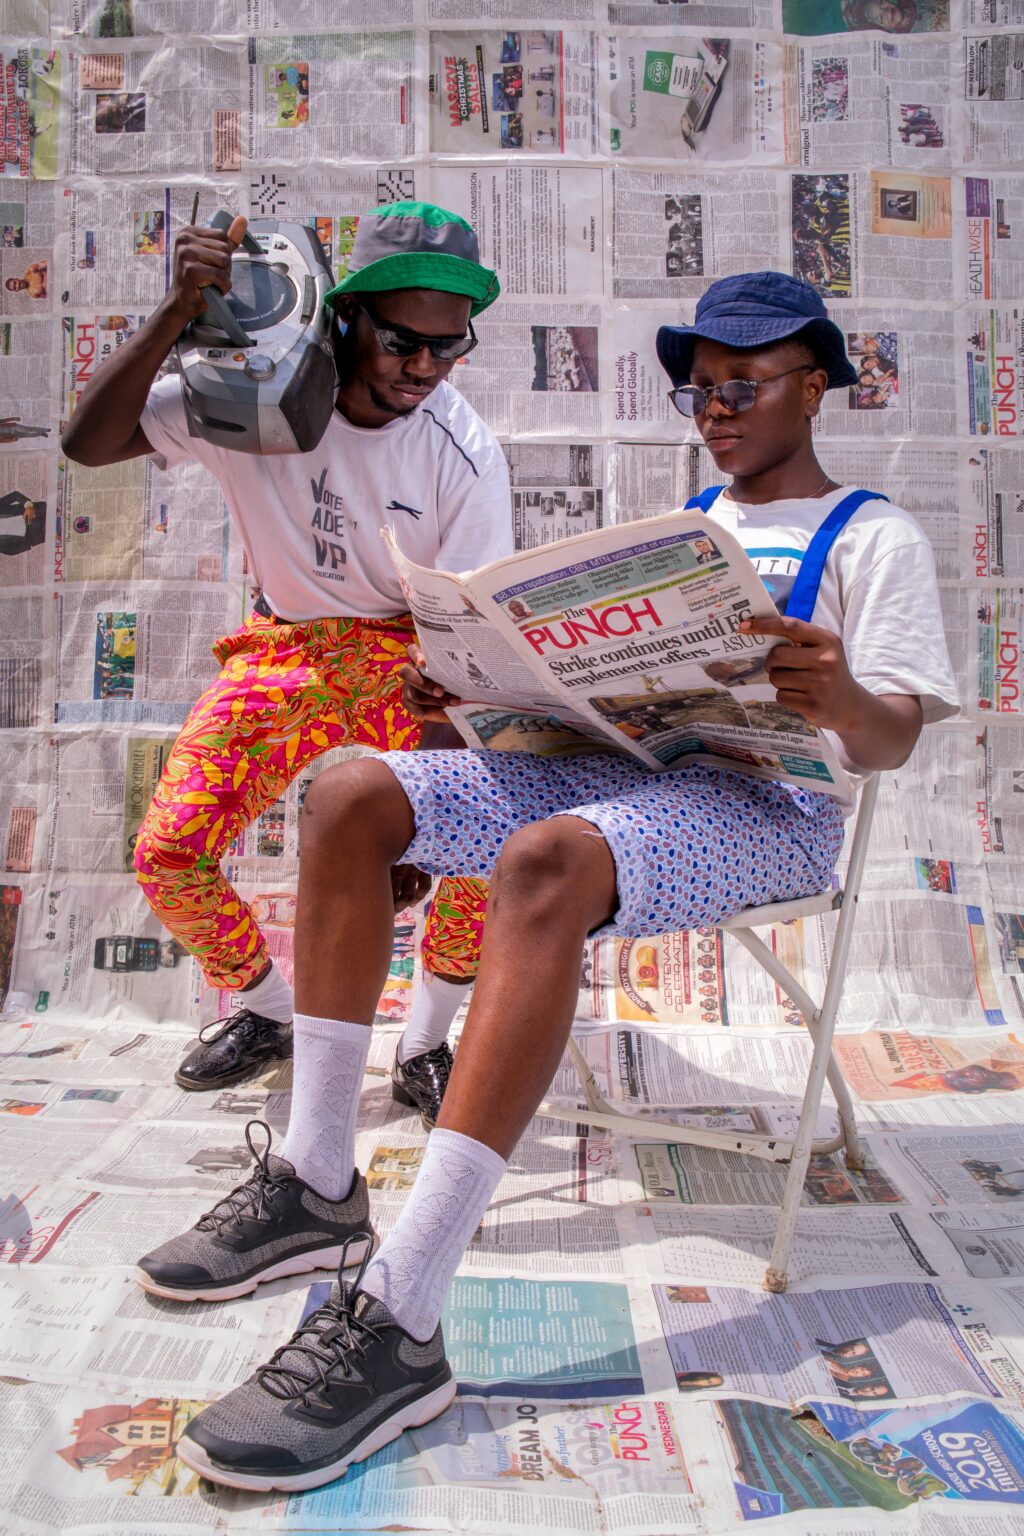 Two men sitting on a chair reading a newspaper.